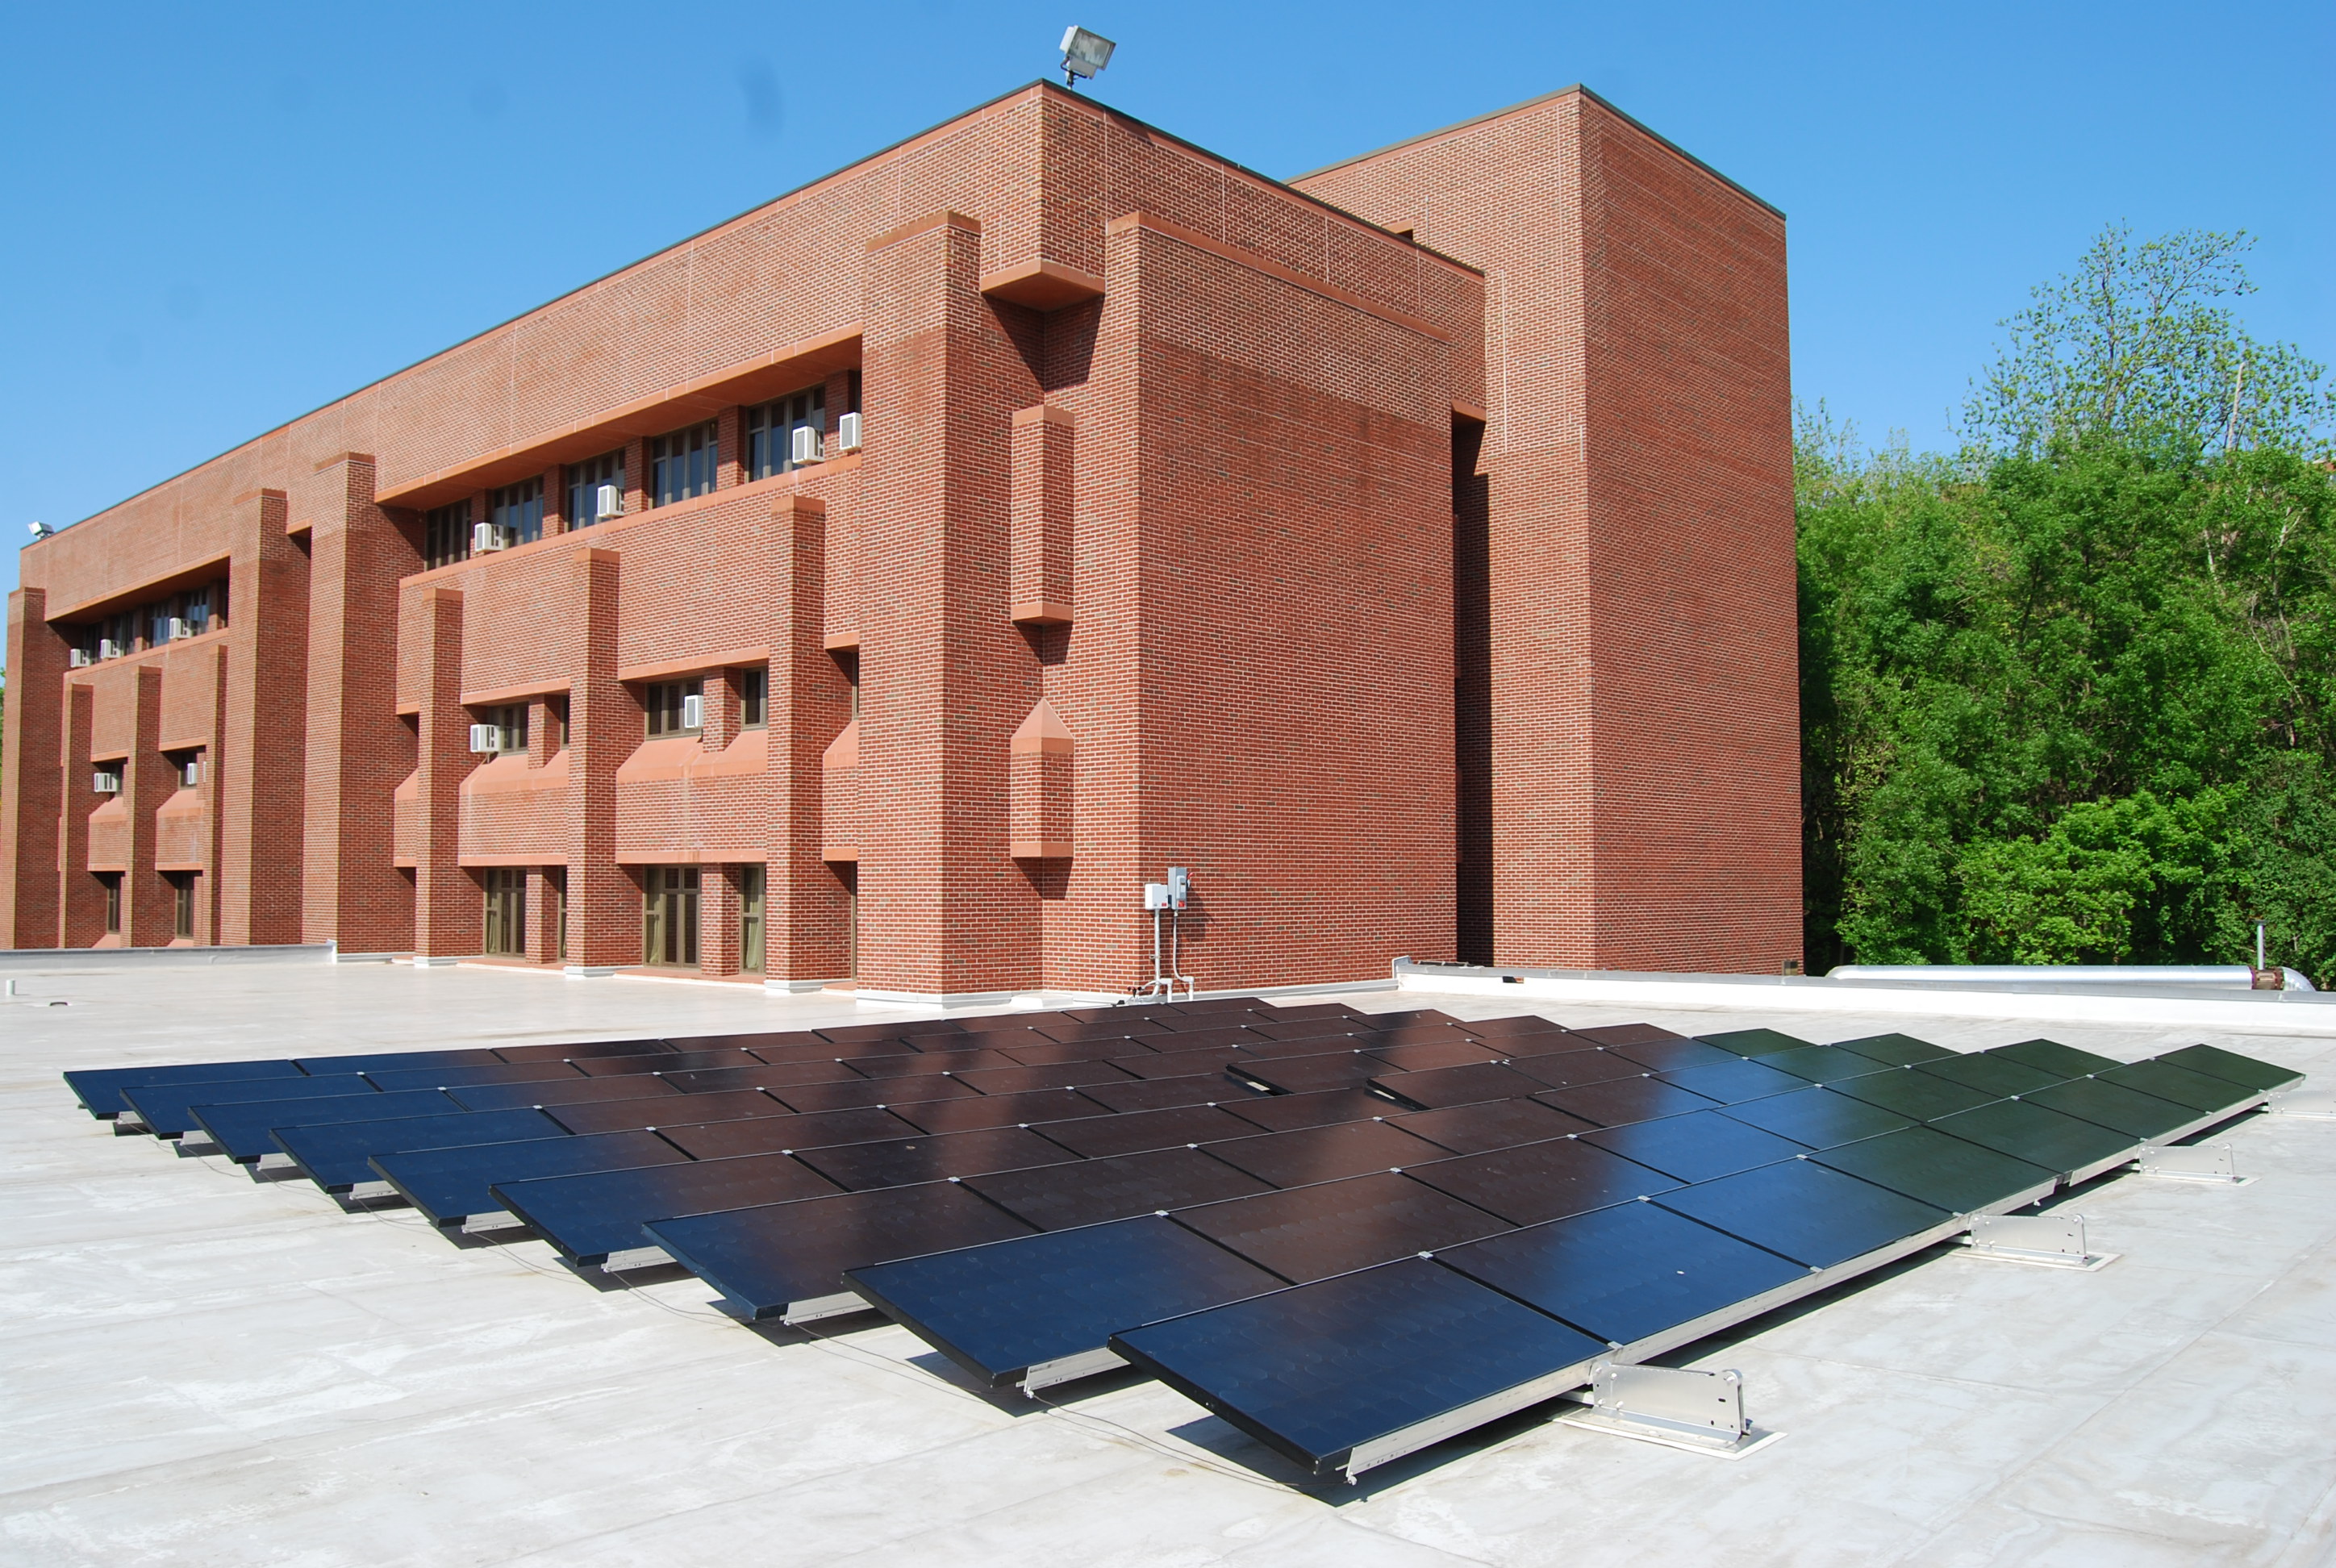 roof mounted photo voltaic array